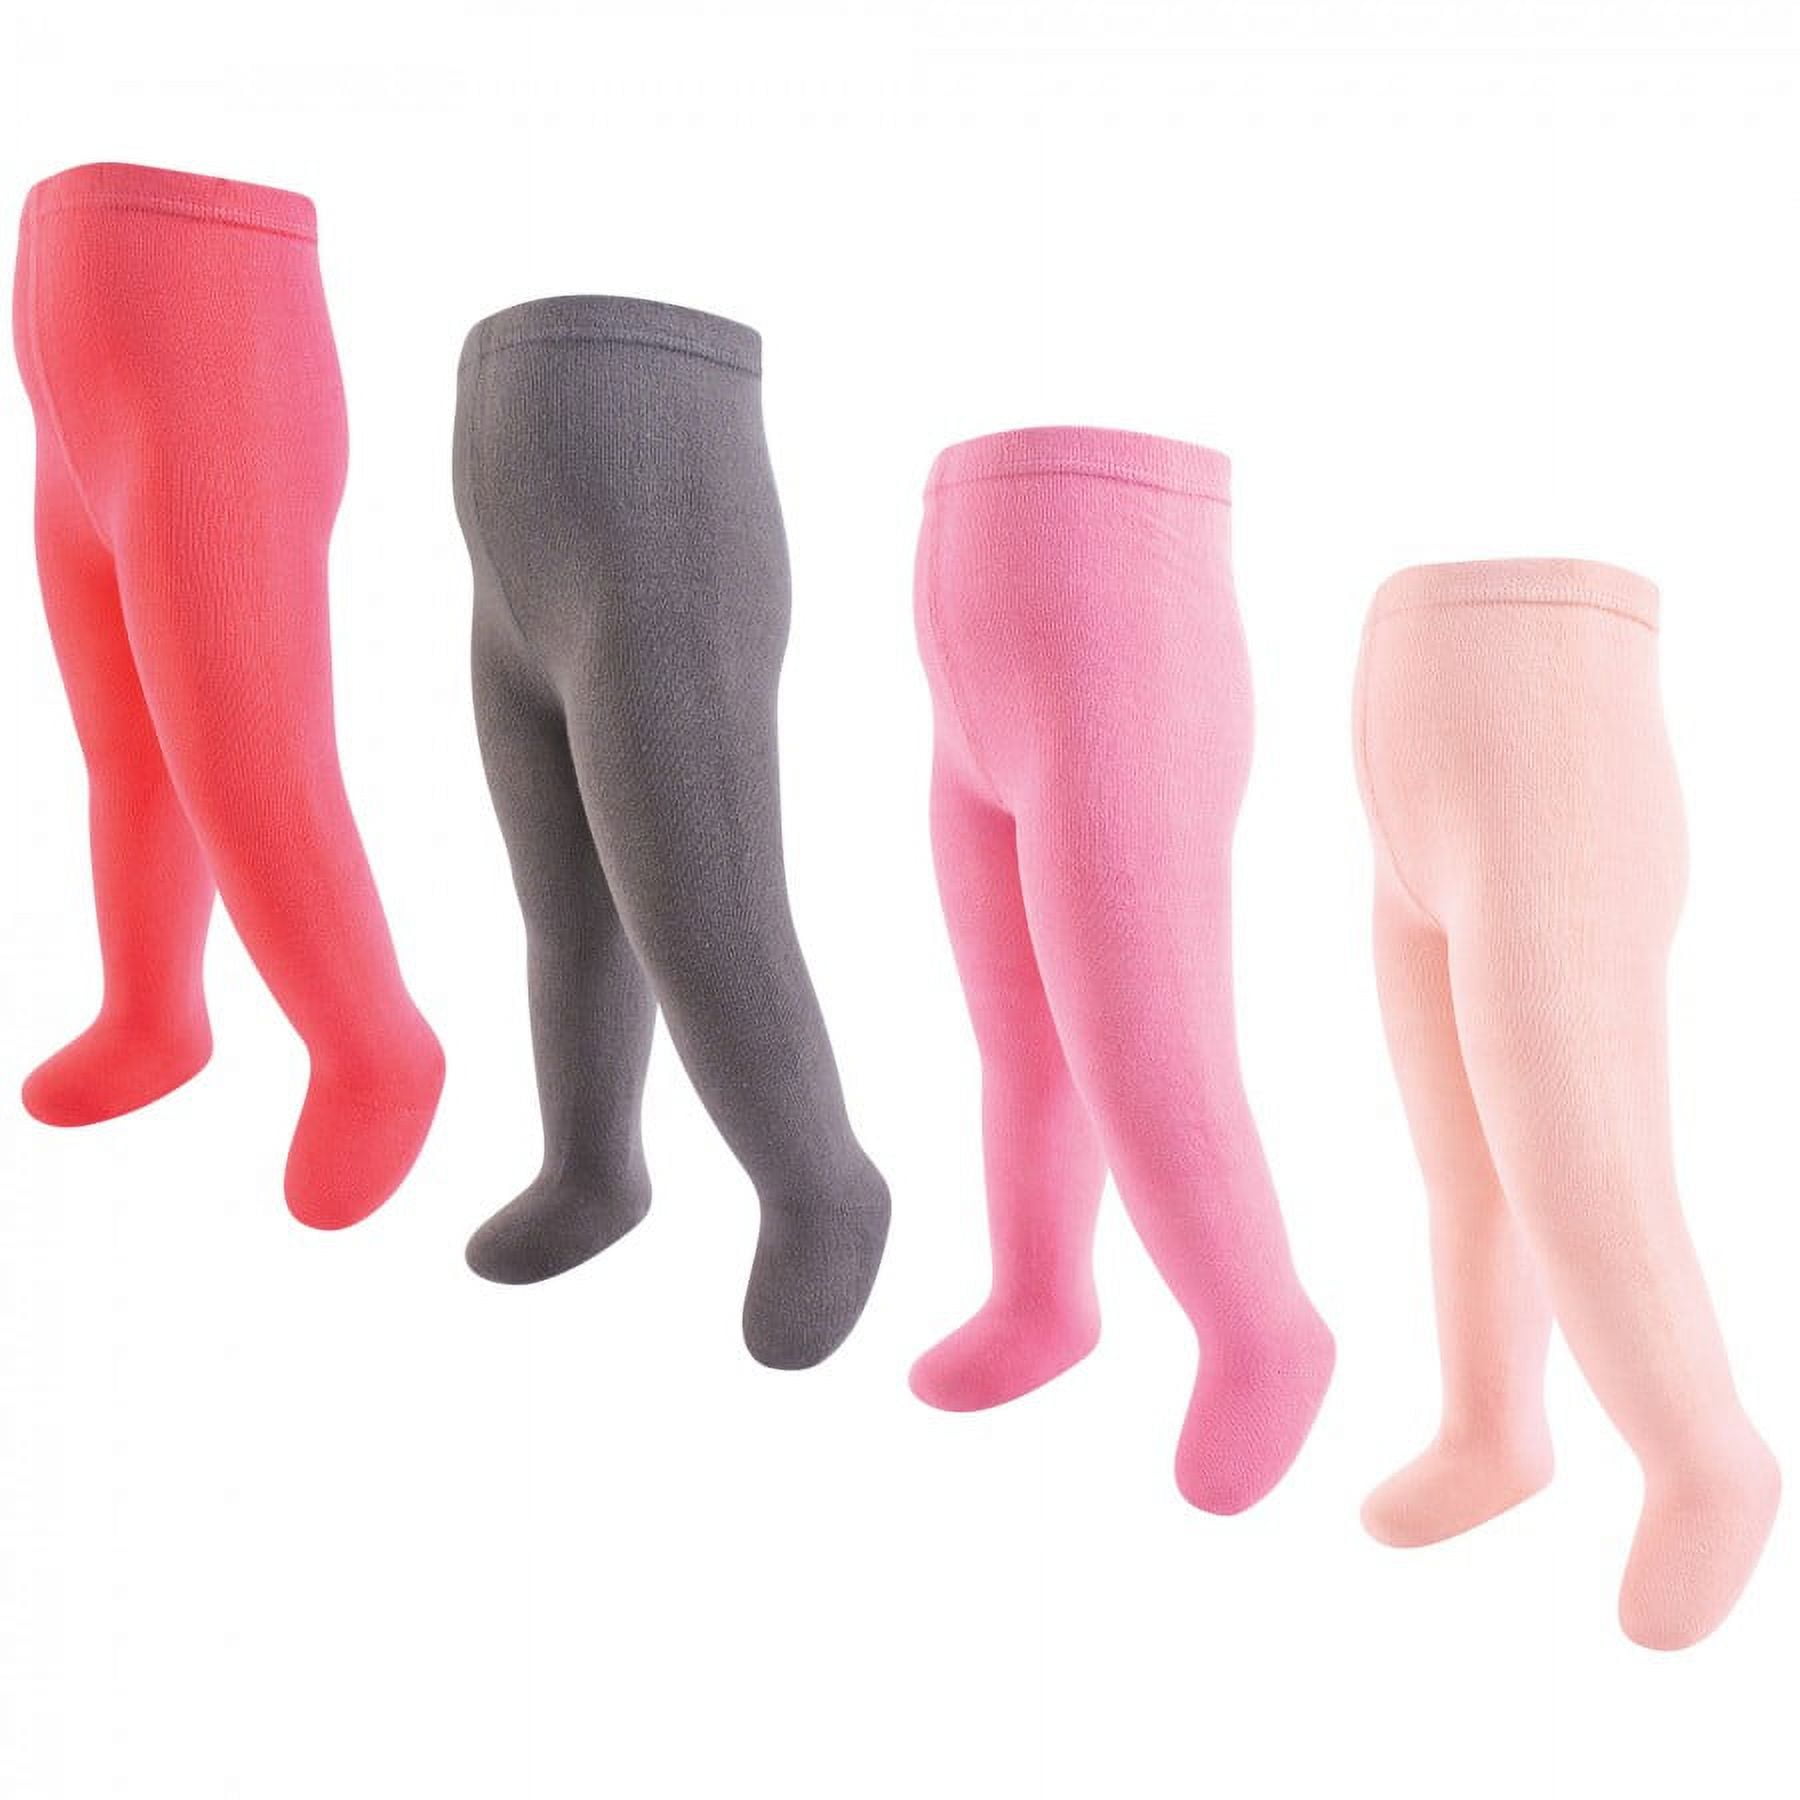 Kids Cotton Leggings For Girls Small 1-2 Years Old